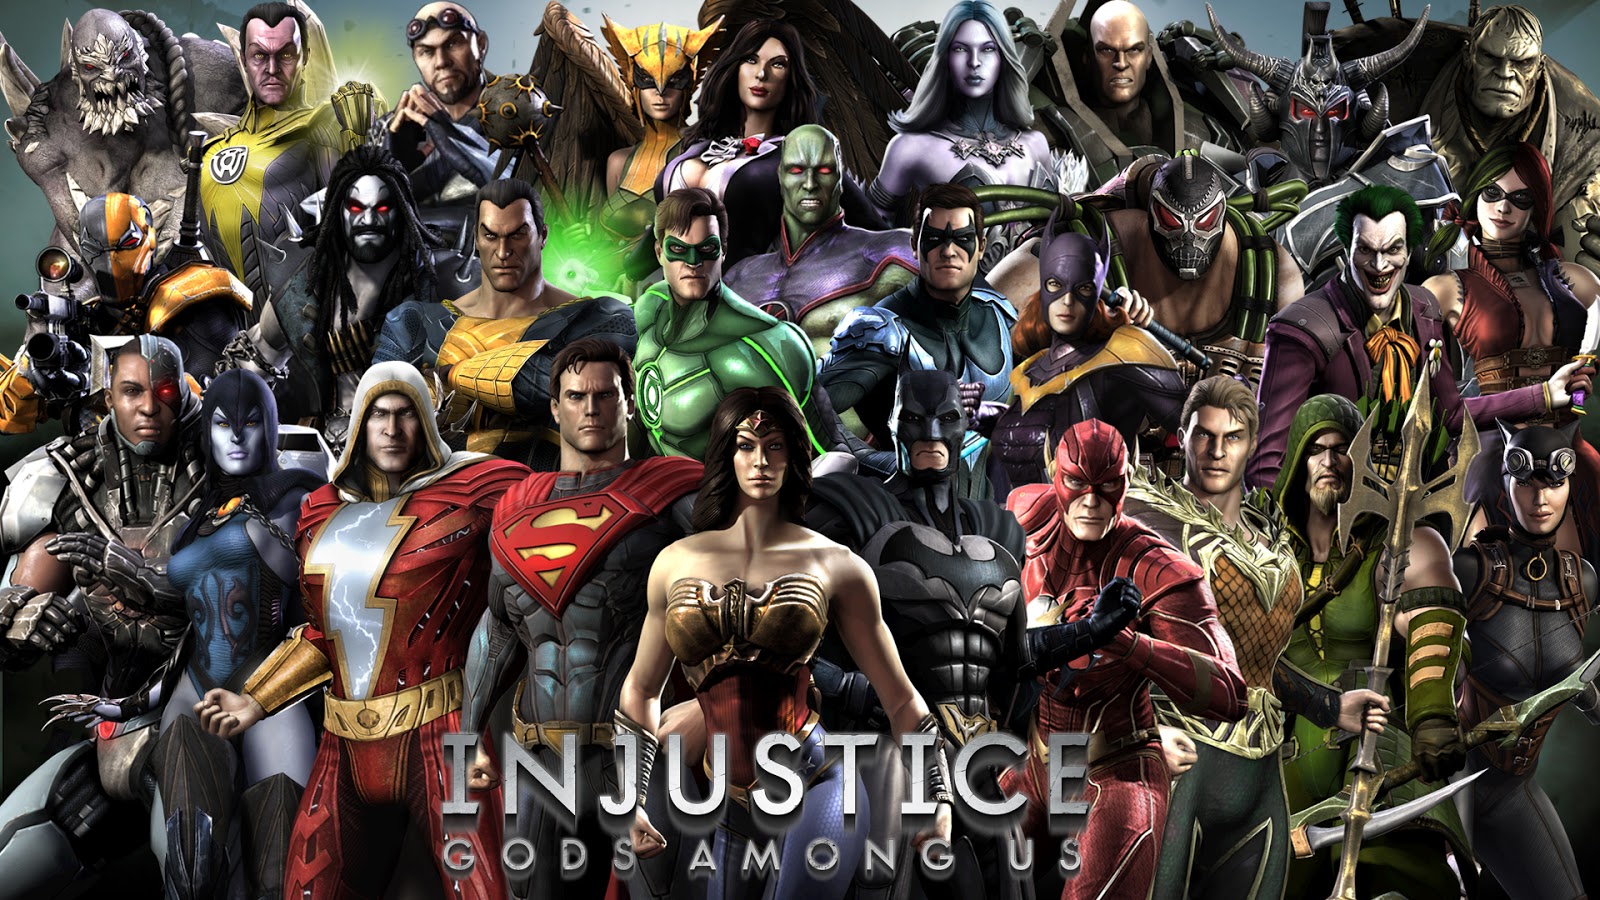 Injustice Gods Among Us PC Download Game For Free